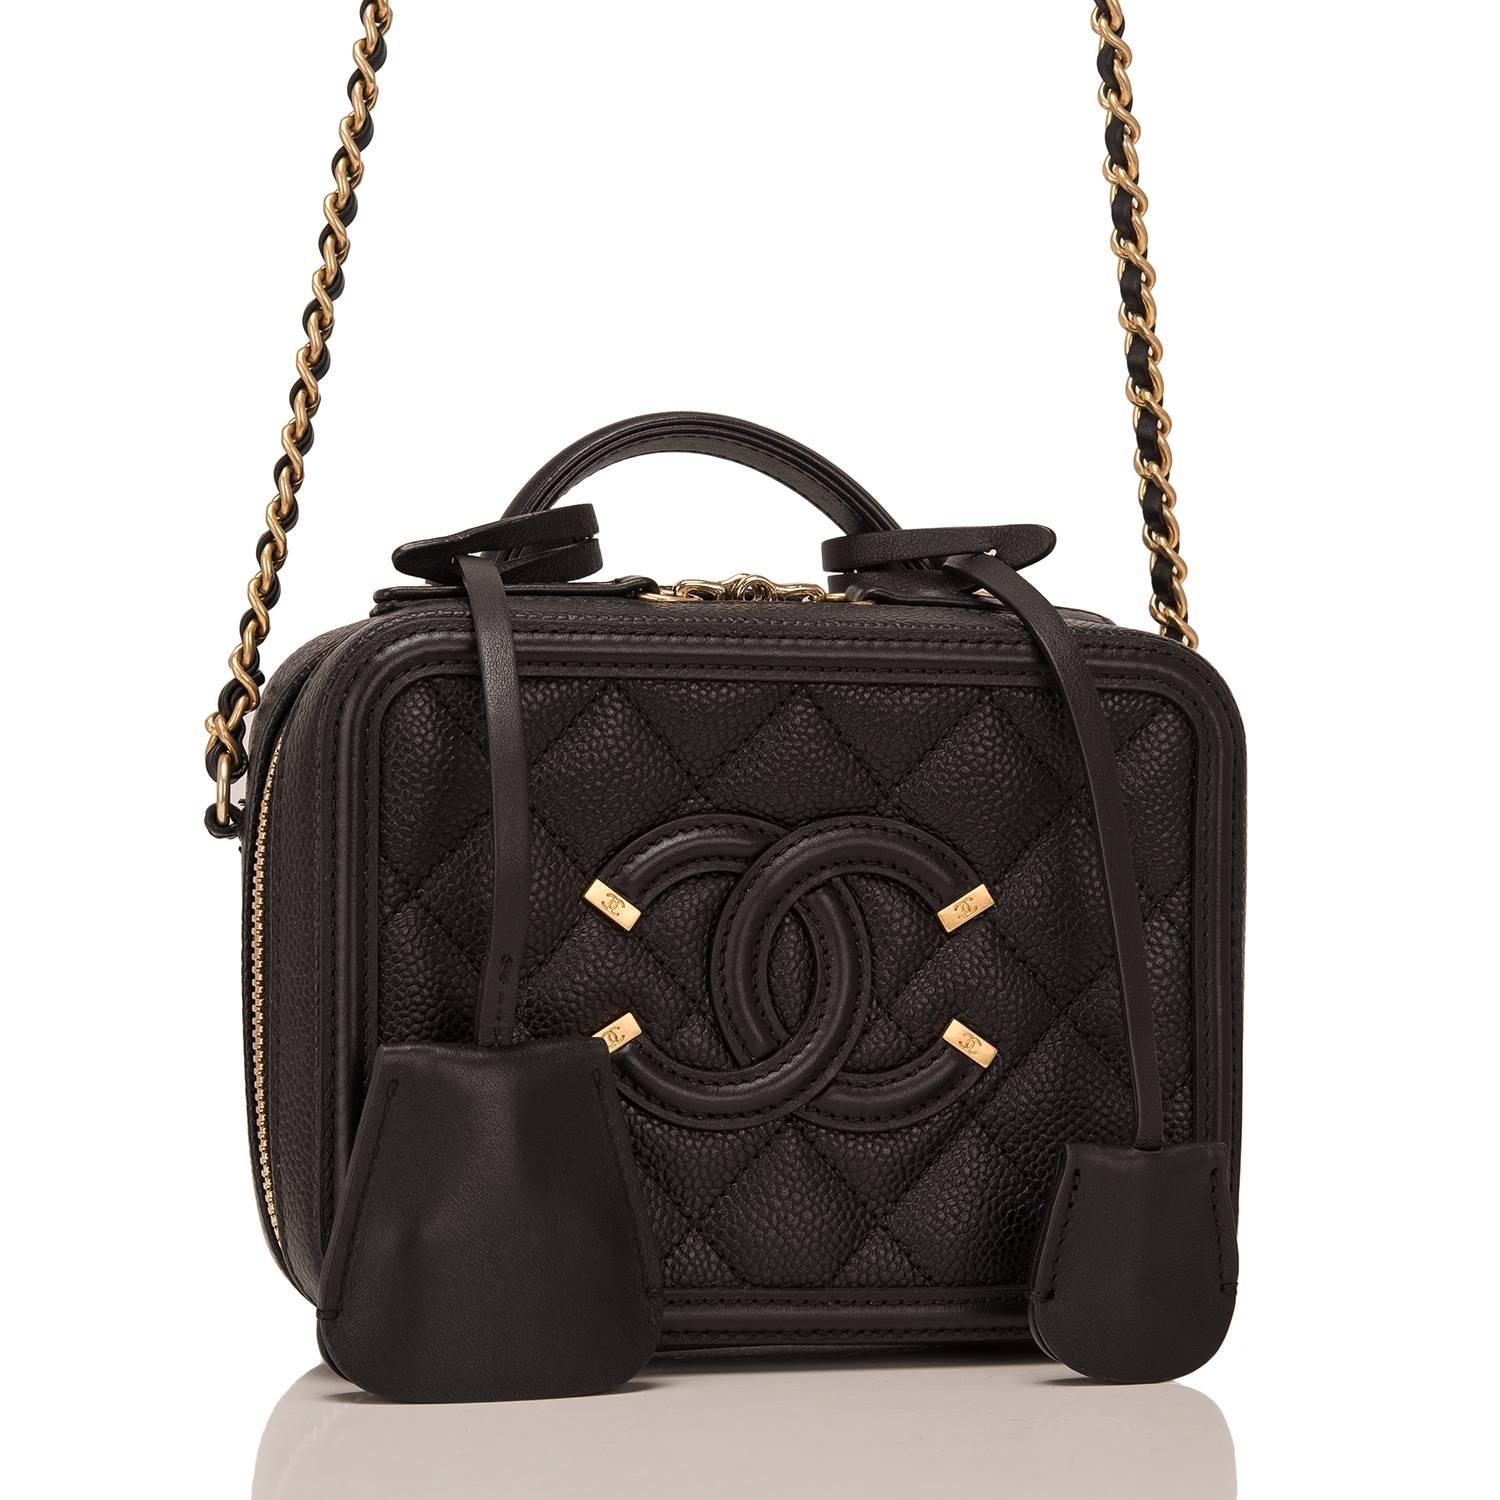 Chanel Mini Filigree Vanity Case of black caviar leather with gold tone hardware.

This bag features Chanel's signature CC logo stitch in on the front, a gold tone CC lock with a clochette, a matching key with another clochette, zip around